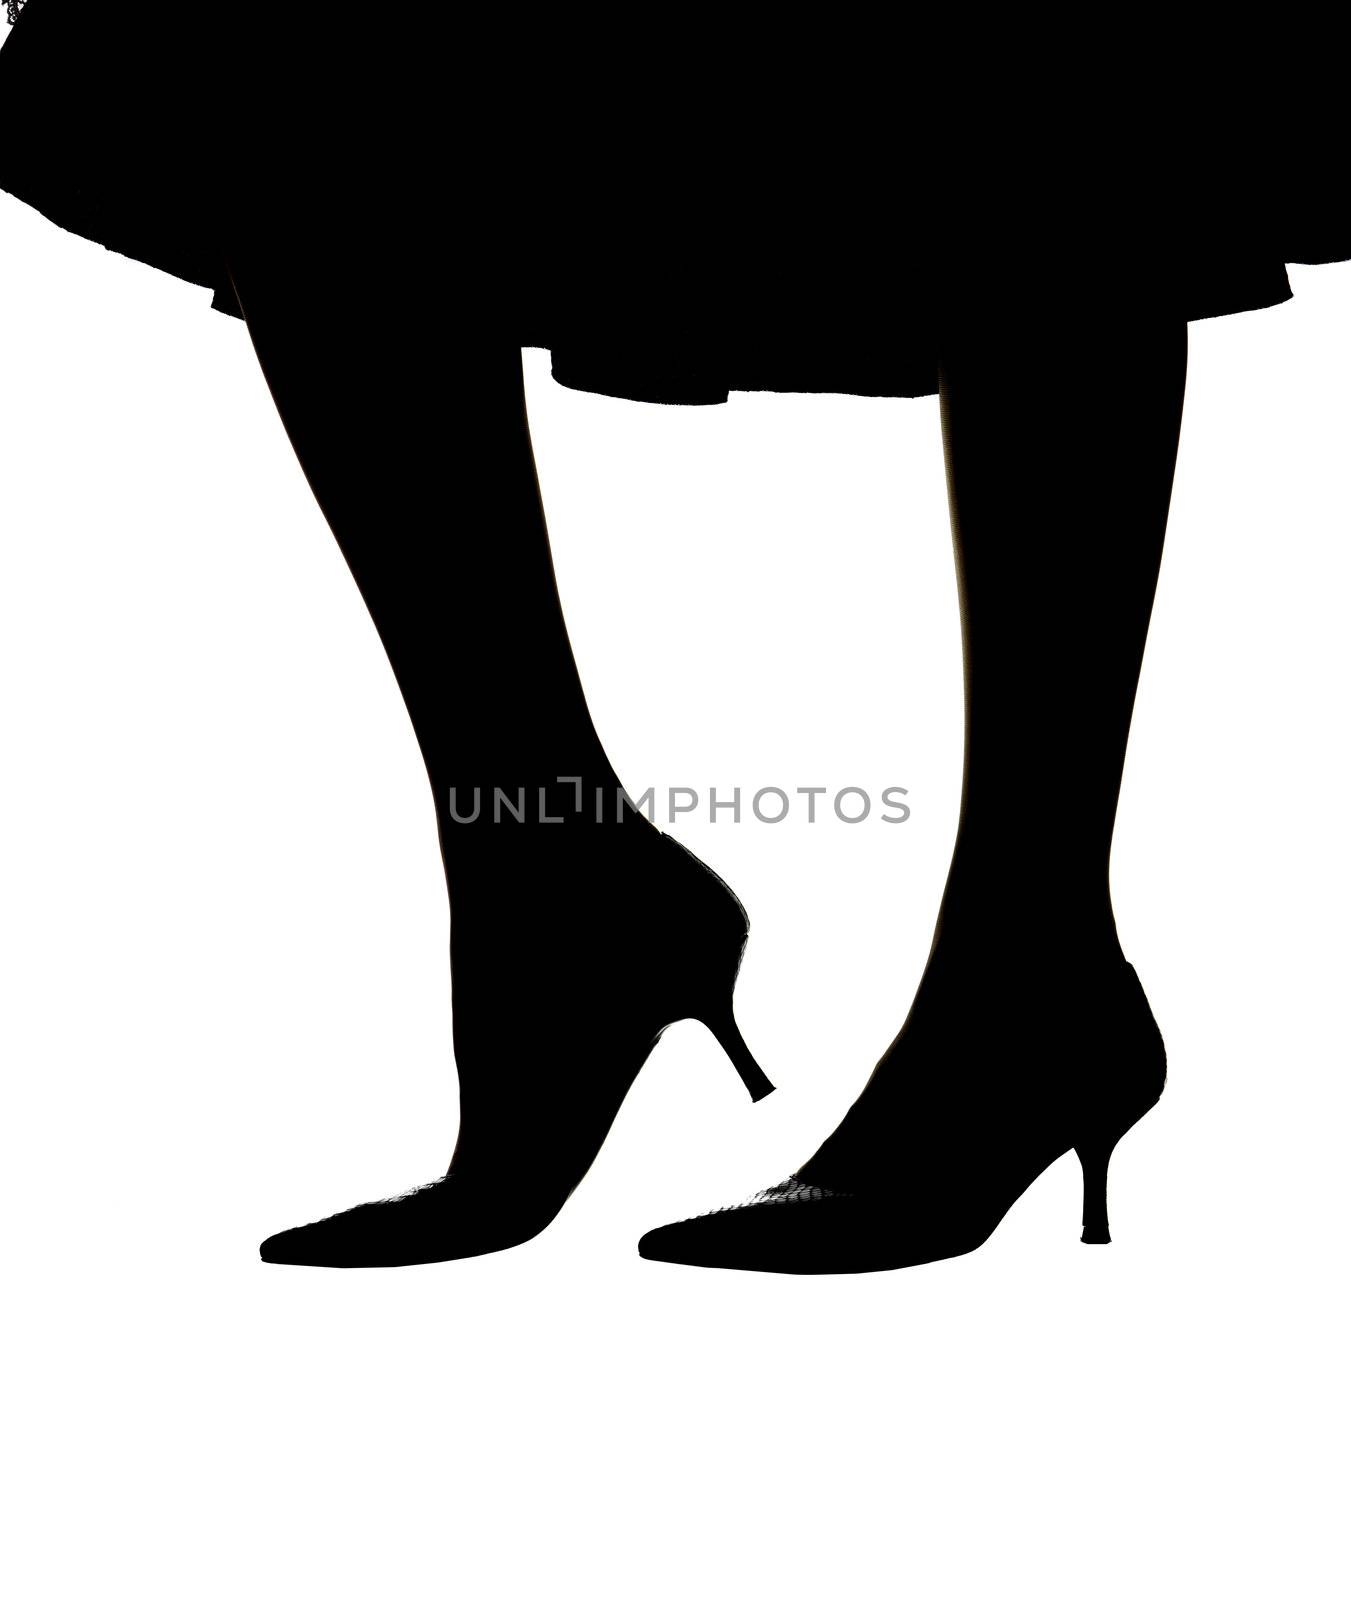 a woman's silhouette